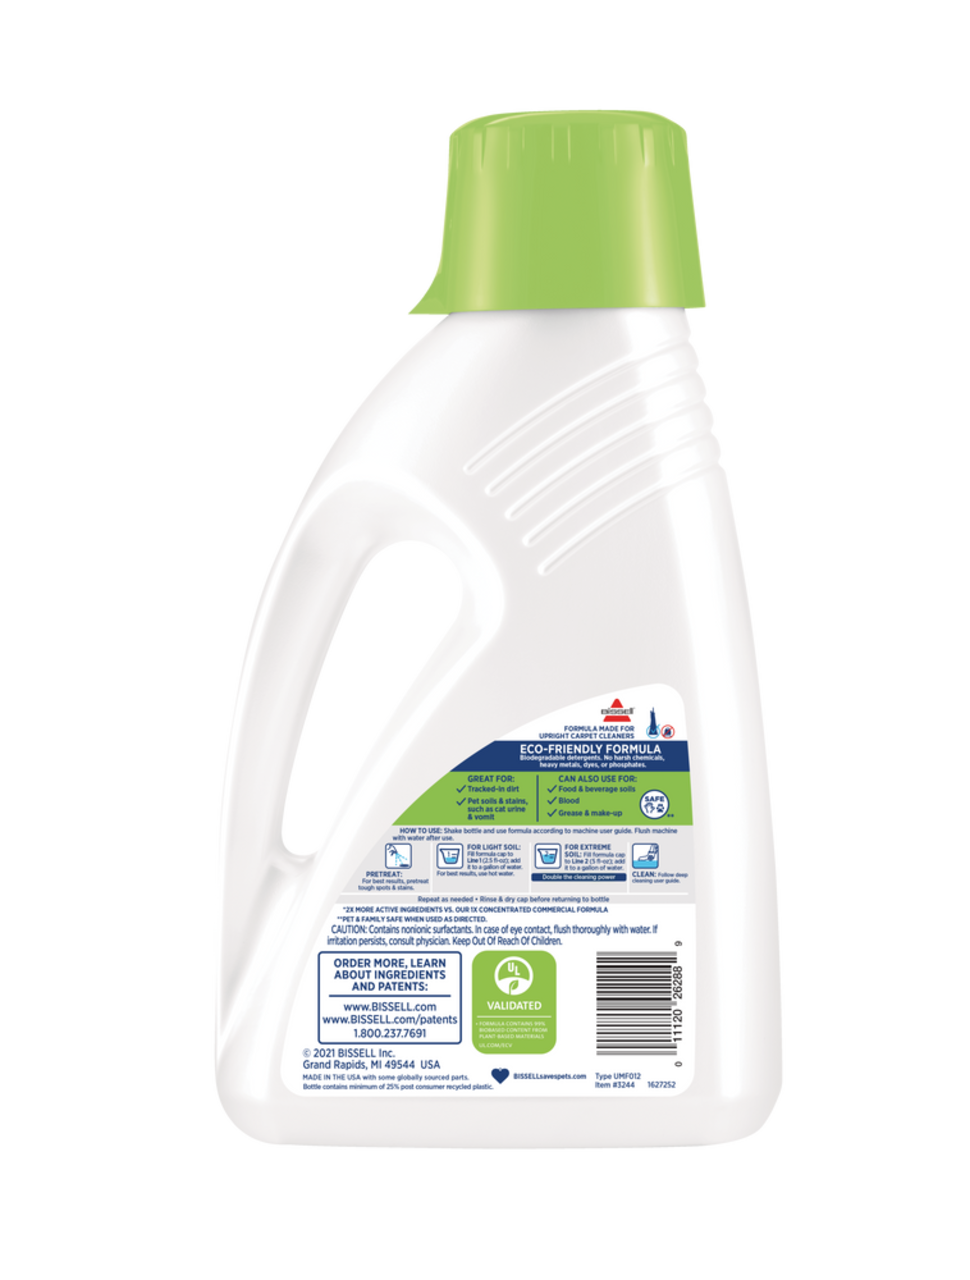 https://media-www.canadiantire.ca/product/living/cleaning/household-cleaning-solutions/1531709/bissell-pet-natural-upright-cleaner-formula-citrus-1-41l-2cb7c711-8d88-4d84-9a96-8a5aac932fc5.png?imdensity=1&imwidth=1244&impolicy=mZoom